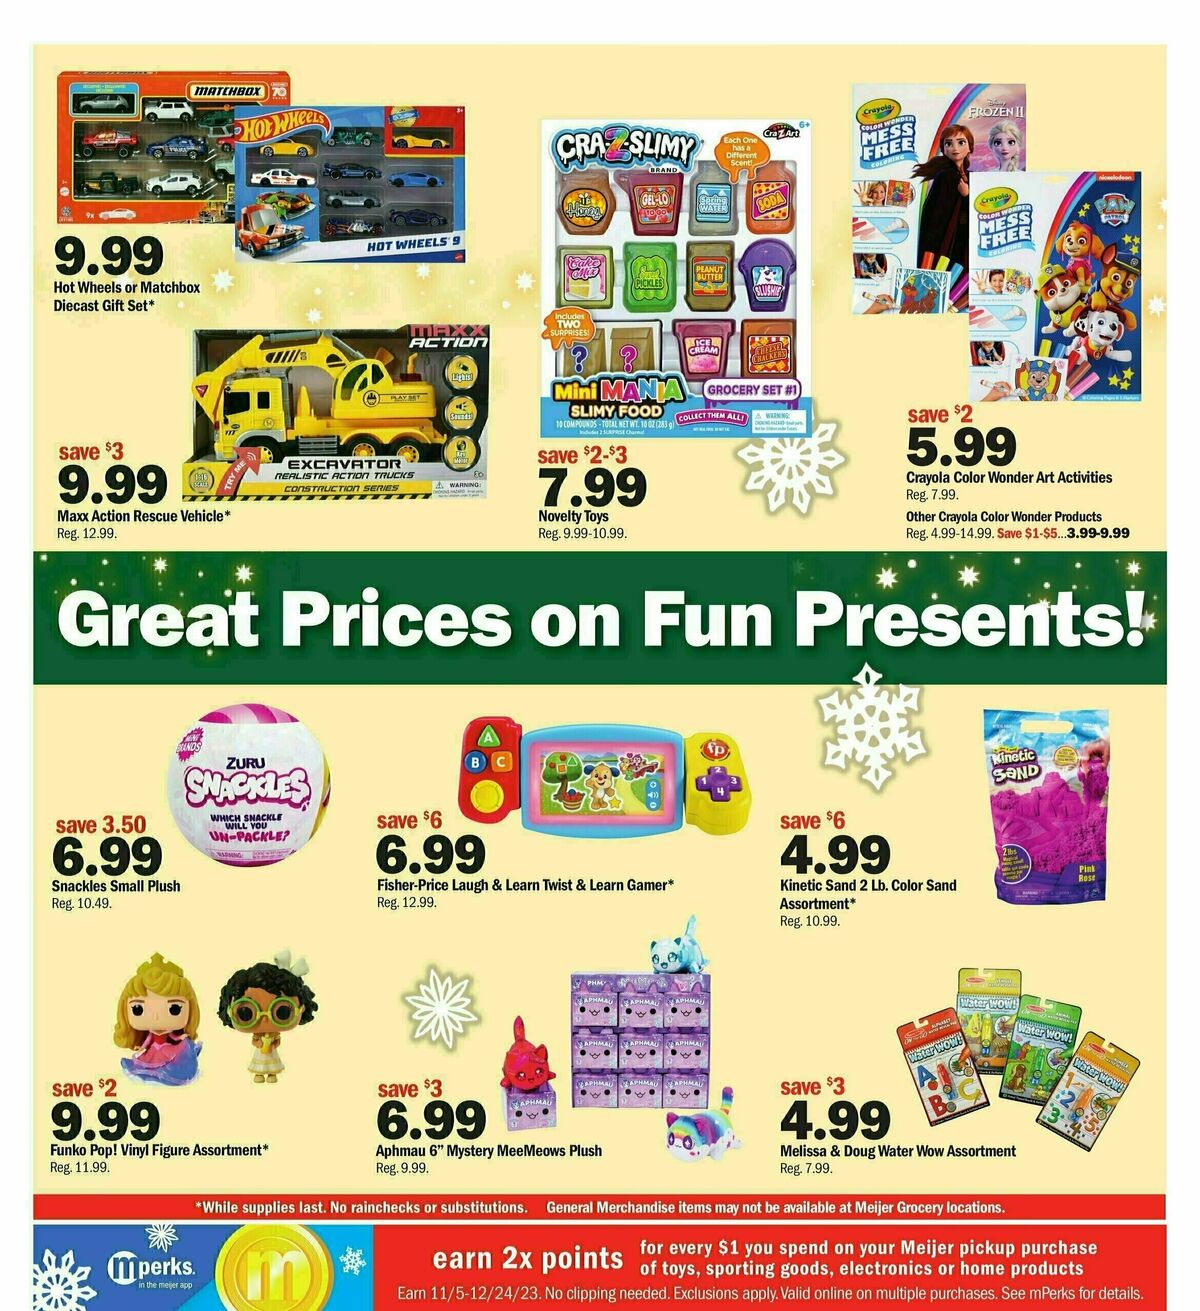 Meijer Holiday Ad Weekly Ad from December 10